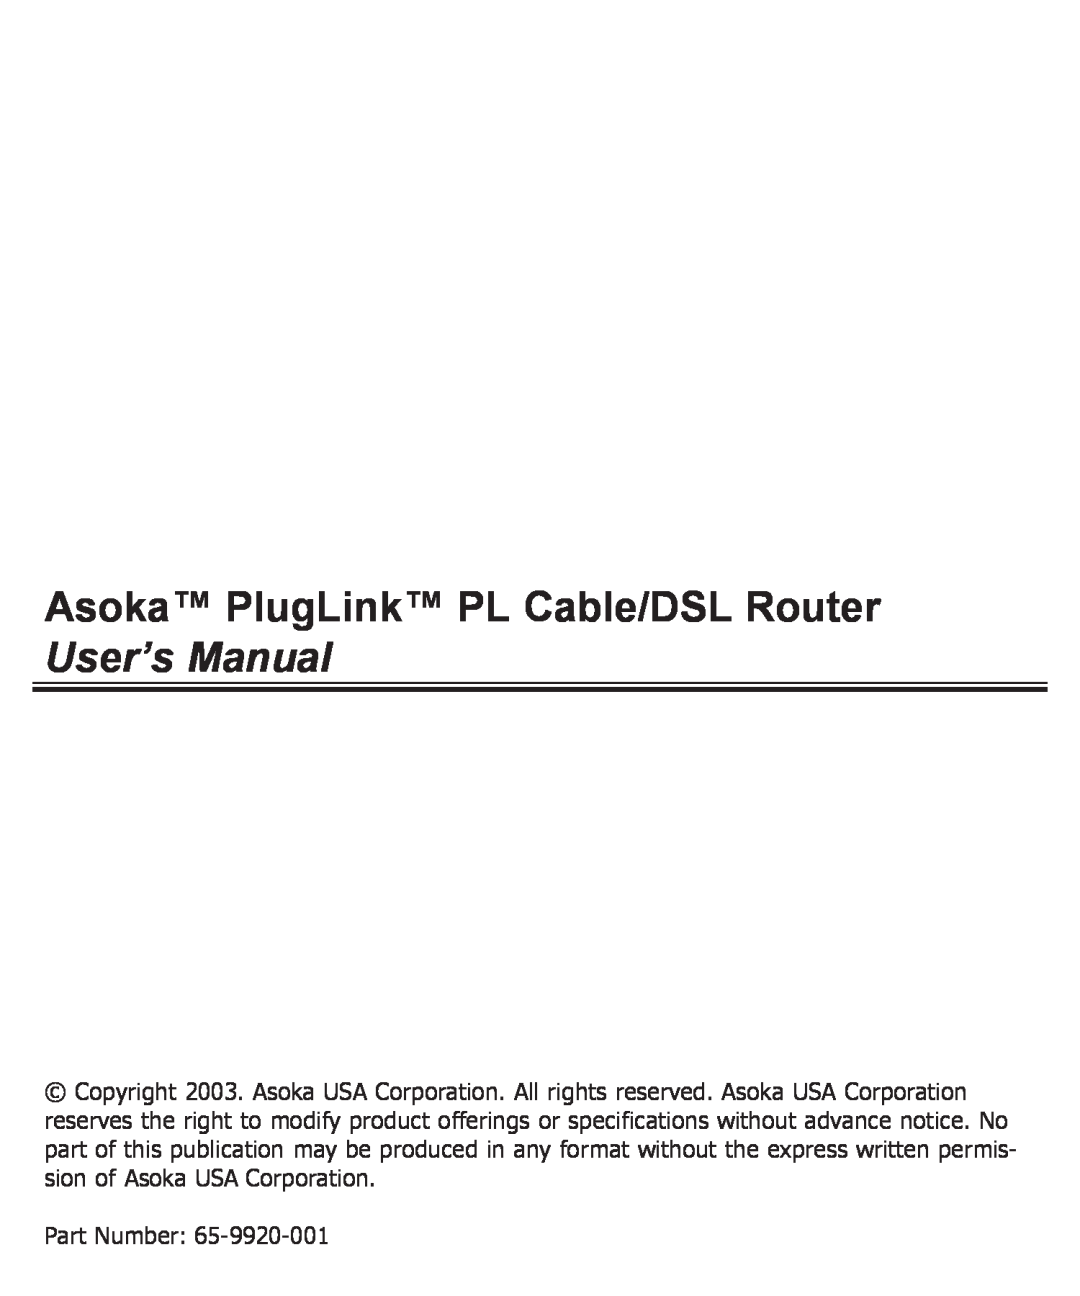 Asoka PL9920-BBR specifications Asoka PlugLink PL Cable/DSL Router, User’s Manual 